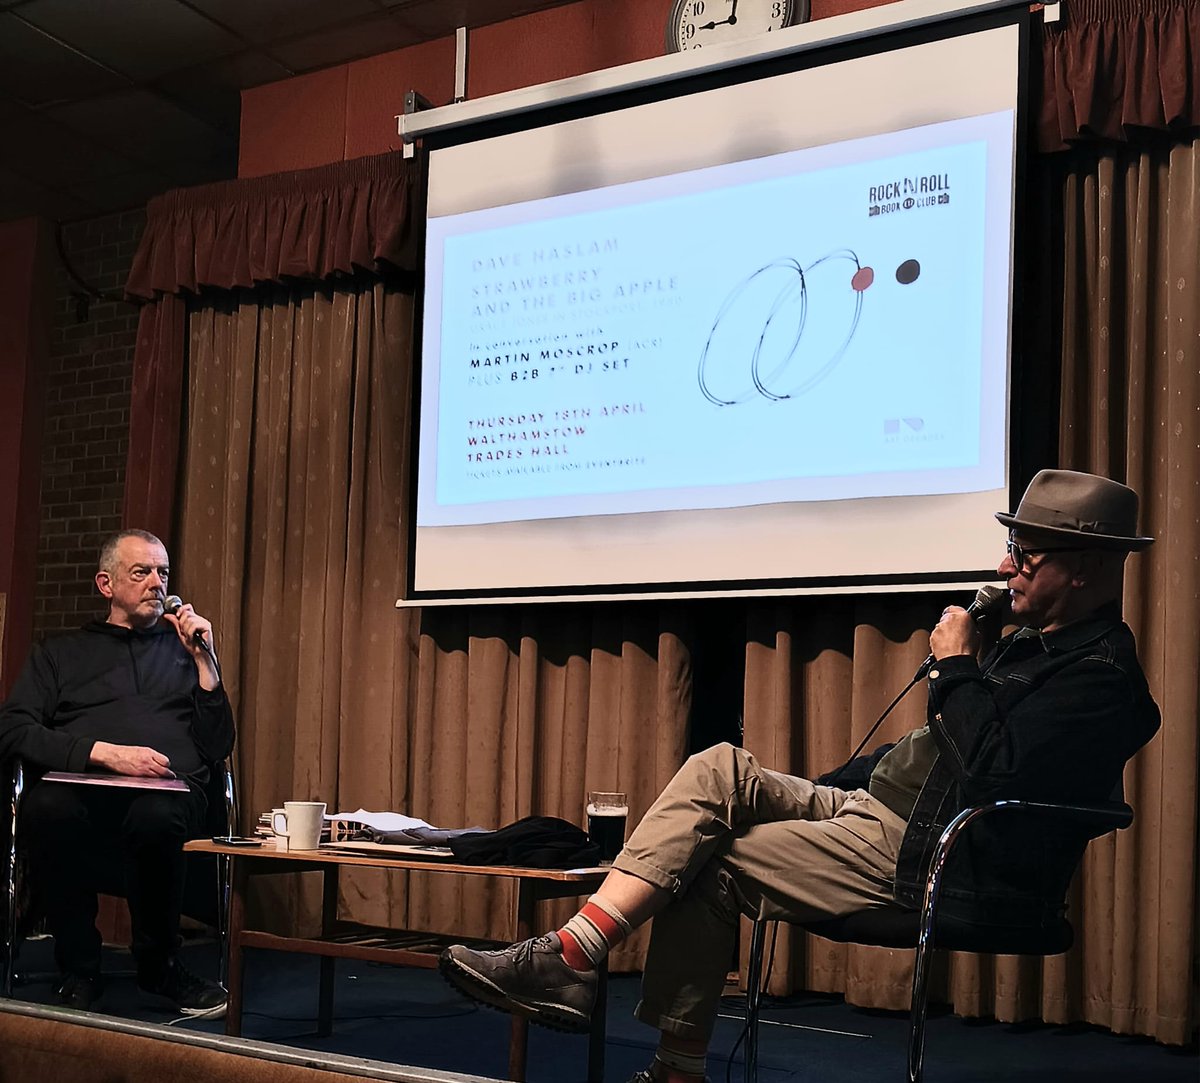 Thanks everyone at @e17RnR_books for the London launch of my book 'Strawberry & the Big Apple' about Grace Jones encountering A Certain Ratio in Stockport in 1980. Martin from ACR was a fabulous guest, shedding light on all things Grace, ACR, Tony Wilson, and New York.